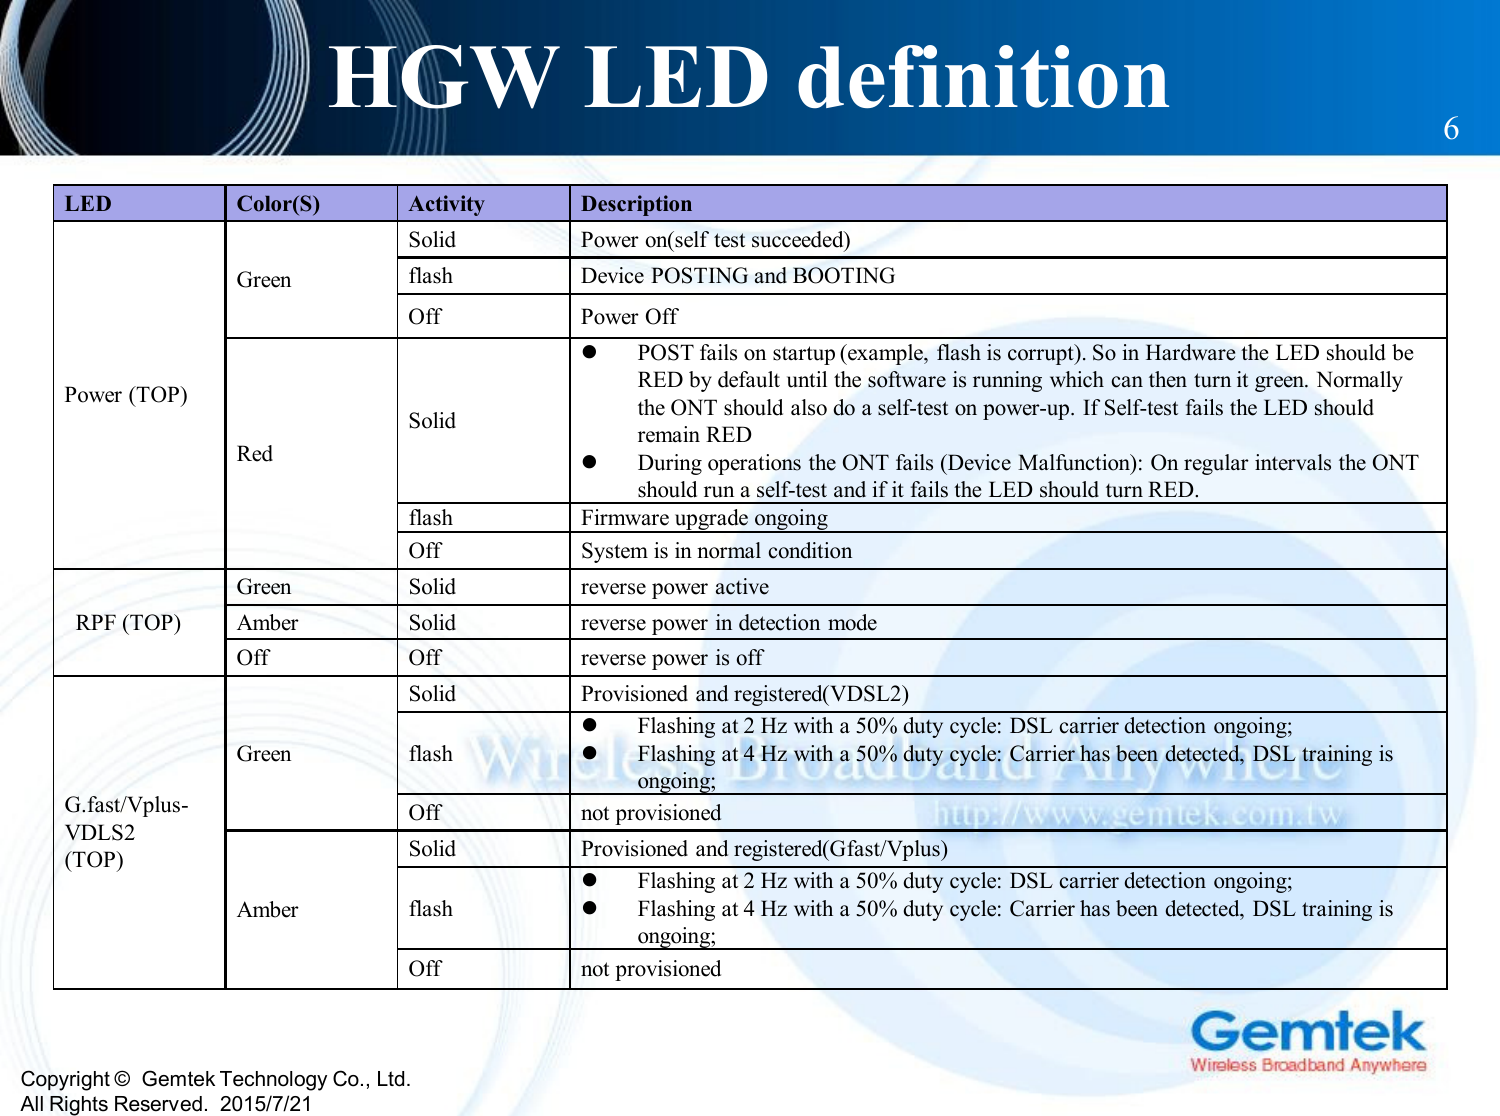 Copyright ©  Gemtek Technology Co., Ltd.All Rights Reserved.  2015/7/21HGW LED definition 6LED Color(S) Activity DescriptionPower (TOP)GreenSolid  Power on(self test succeeded)flash Device POSTING and BOOTINGOff  Power OffRedSolidPOST fails on startup (example, flash is corrupt). So in Hardware the LED should be RED by default until the software is running which can then turn it green. Normally the ONT should also do a self-test on power-up. If Self-test fails the LED should remain REDDuring operations the ONT fails (Device Malfunction): On regular intervals the ONT should run a self-test and if it fails the LED should turn RED.flash Firmware upgrade ongoingOff System is in normal conditionRPF (TOP)Green Solid reverse power activeAmber Solid reverse power in detection modeOff Off reverse power is offG.fast/Vplus-VDLS2(TOP) GreenSolid  Provisioned and registered(VDSL2) flashFlashing at 2 Hz with a 50% duty cycle: DSL carrier detection ongoing;Flashing at 4 Hz with a 50% duty cycle: Carrier has been detected, DSL training is ongoing;Off not provisionedAmberSolid  Provisioned and registered(Gfast/Vplus)flashFlashing at 2 Hz with a 50% duty cycle: DSL carrier detection ongoing;Flashing at 4 Hz with a 50% duty cycle: Carrier has been detected, DSL training is ongoing;Off not provisioned